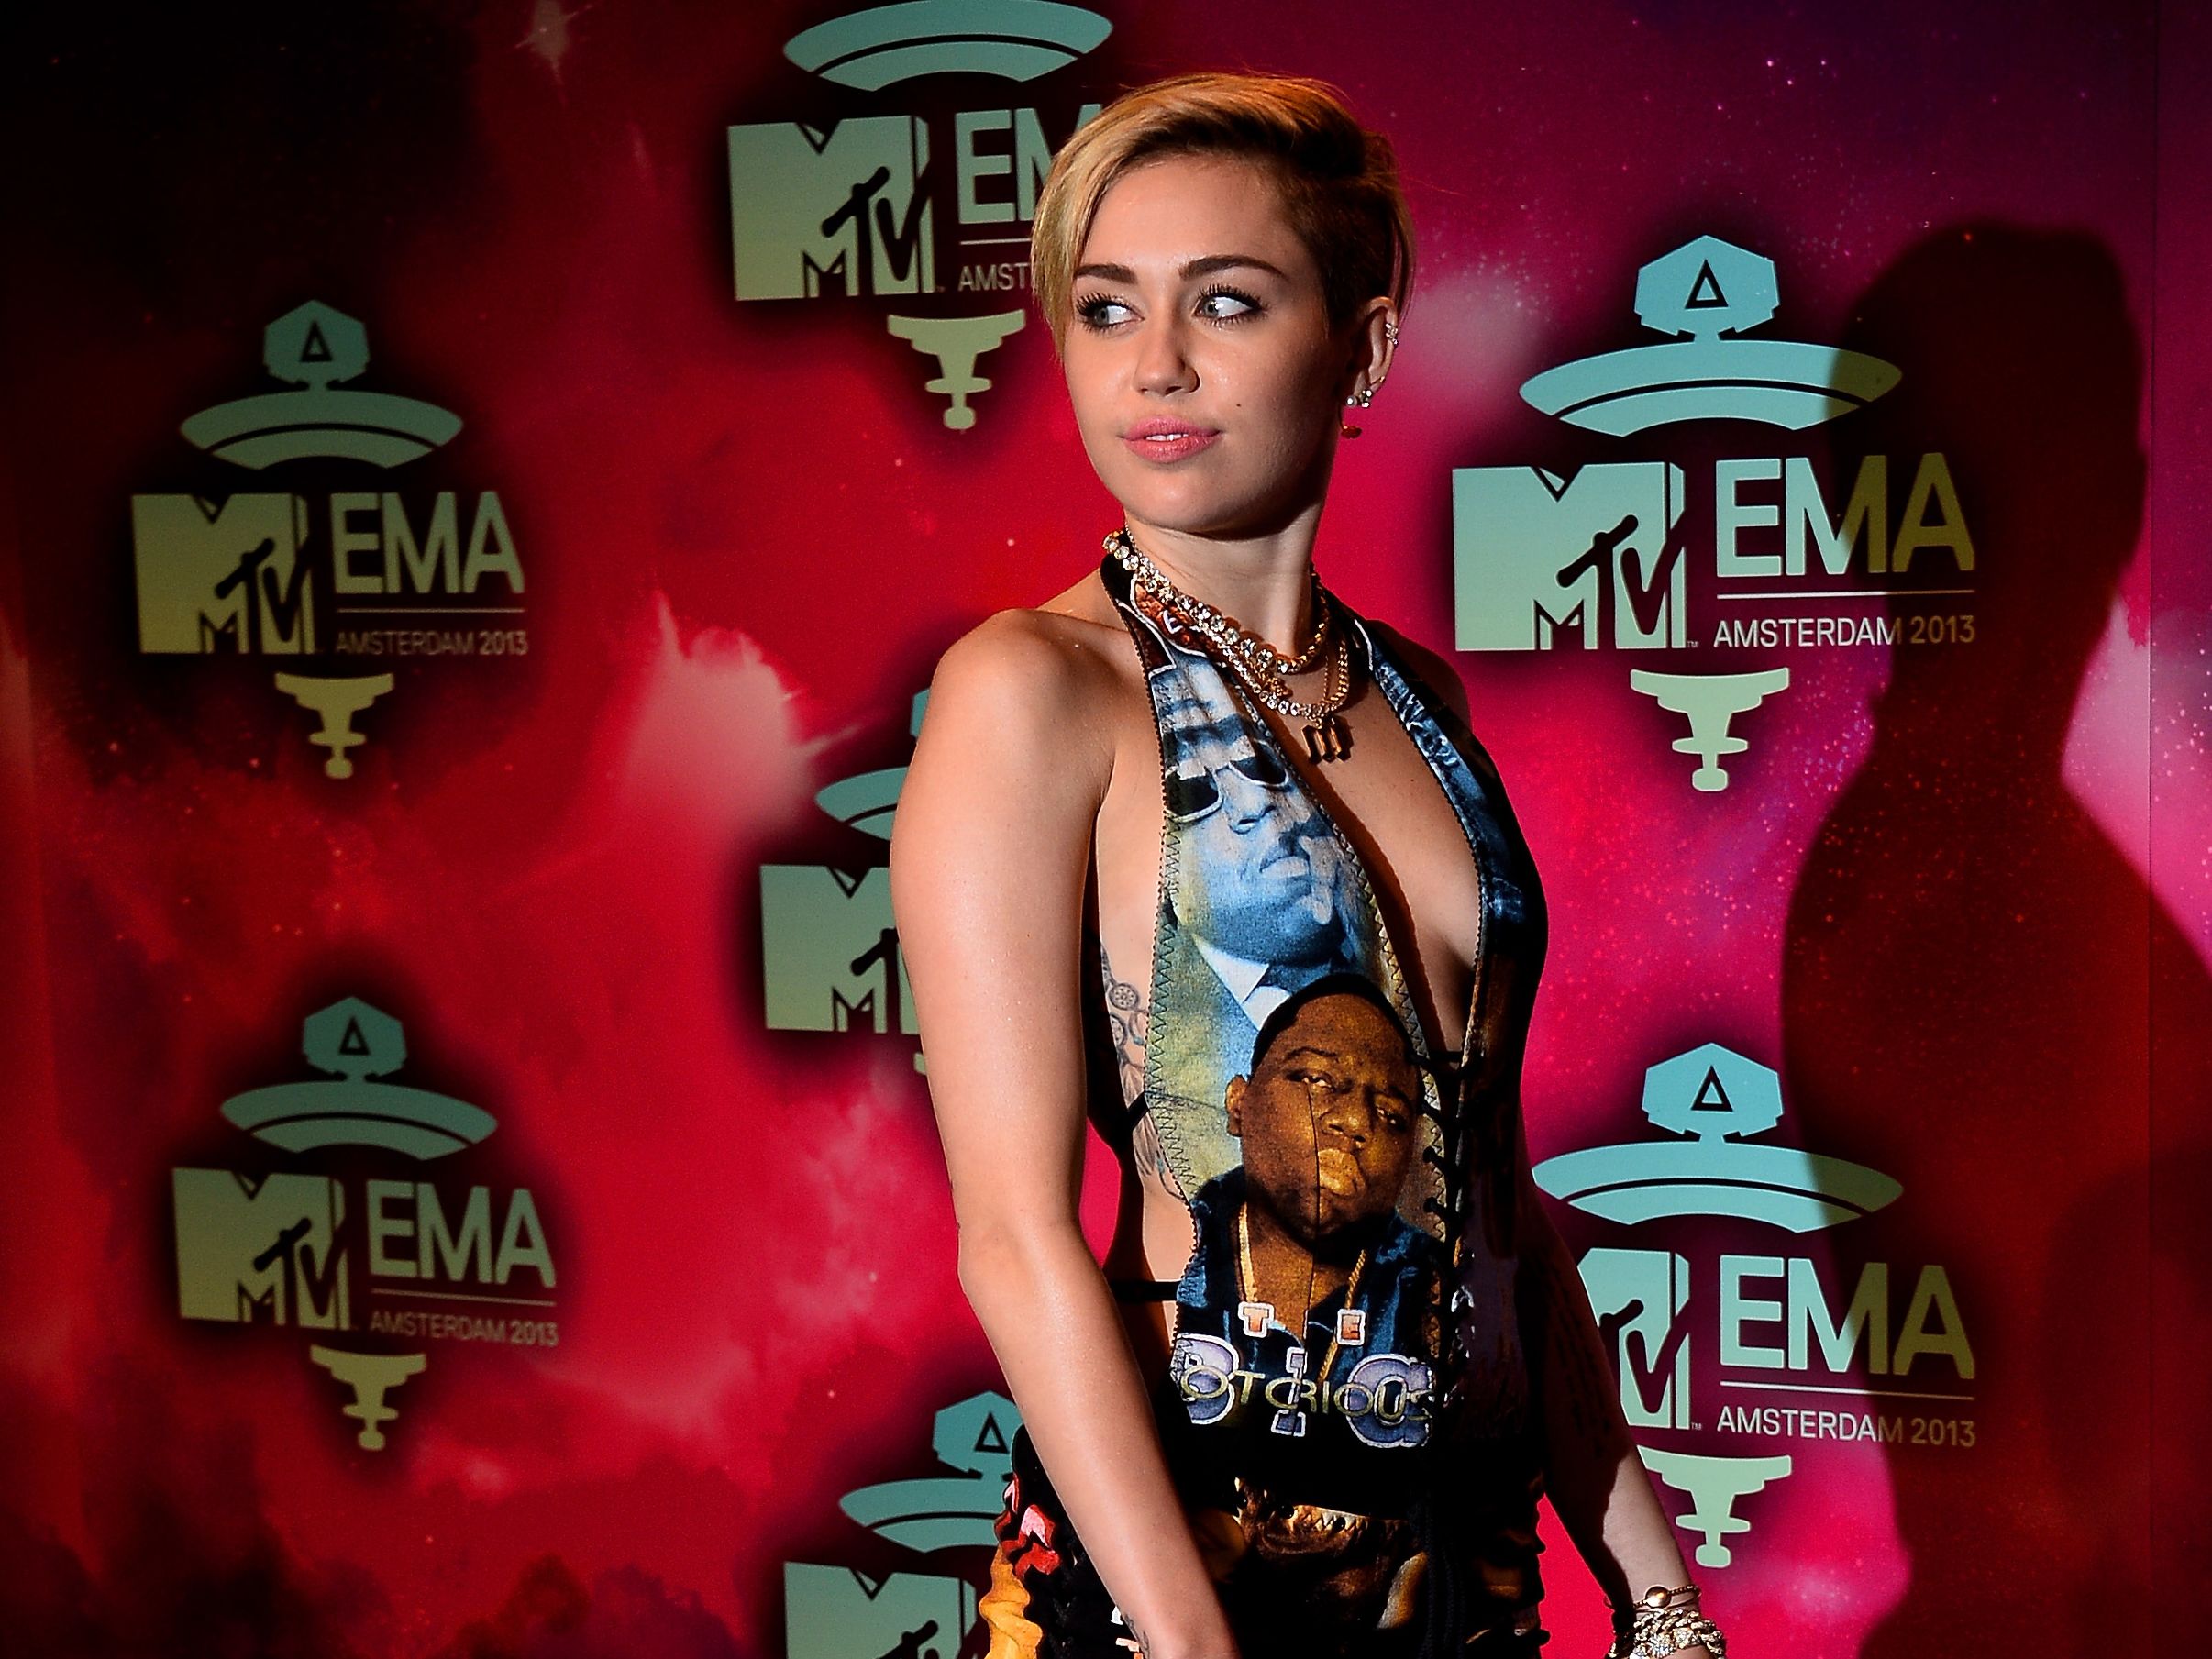 Miley Cyrus Xxx Videos - Opinion: Miley Cyrus is sexual -- get over it | CNN